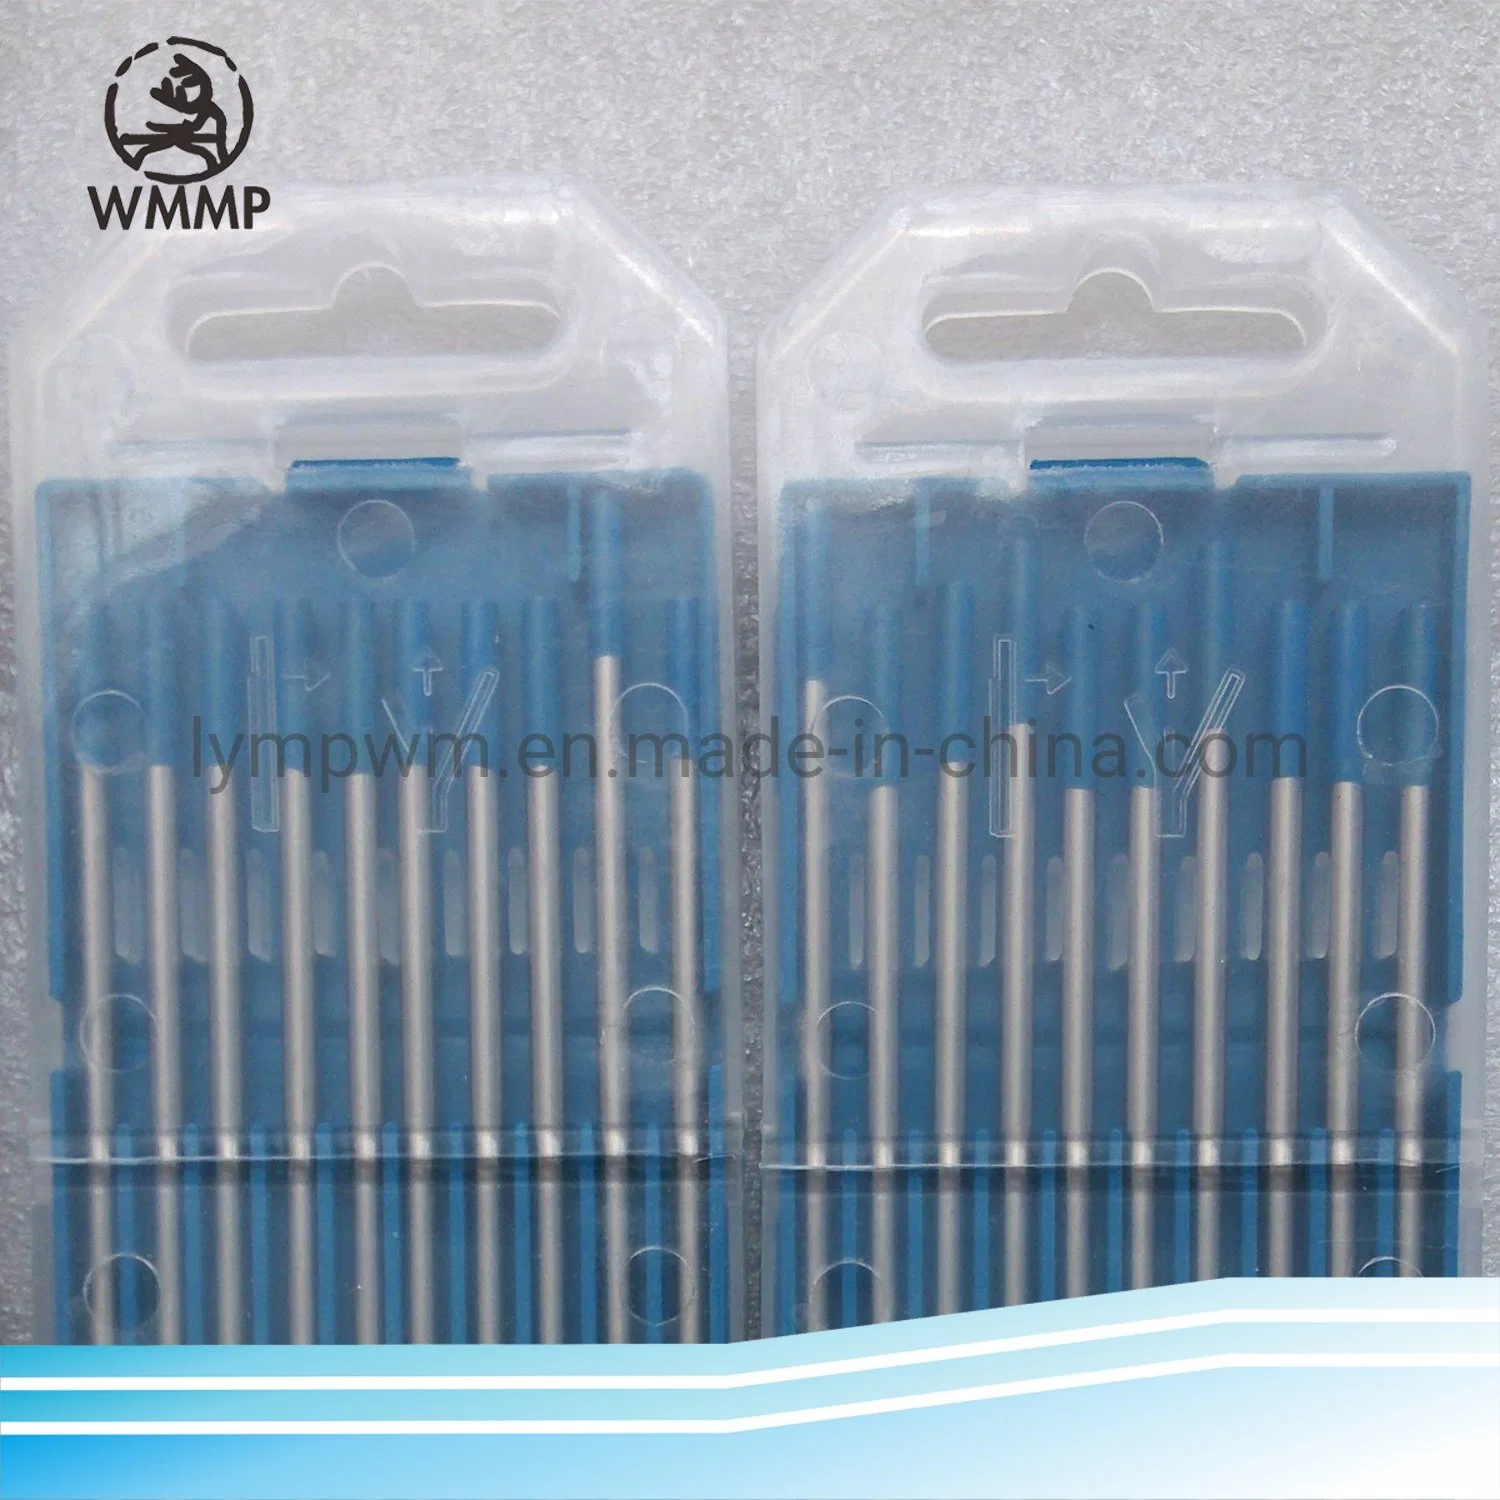 Wt20 2% Thoriated Tungsten Electrodes Dia6.0mm Length 150mm Tungsten Rods Electrodes